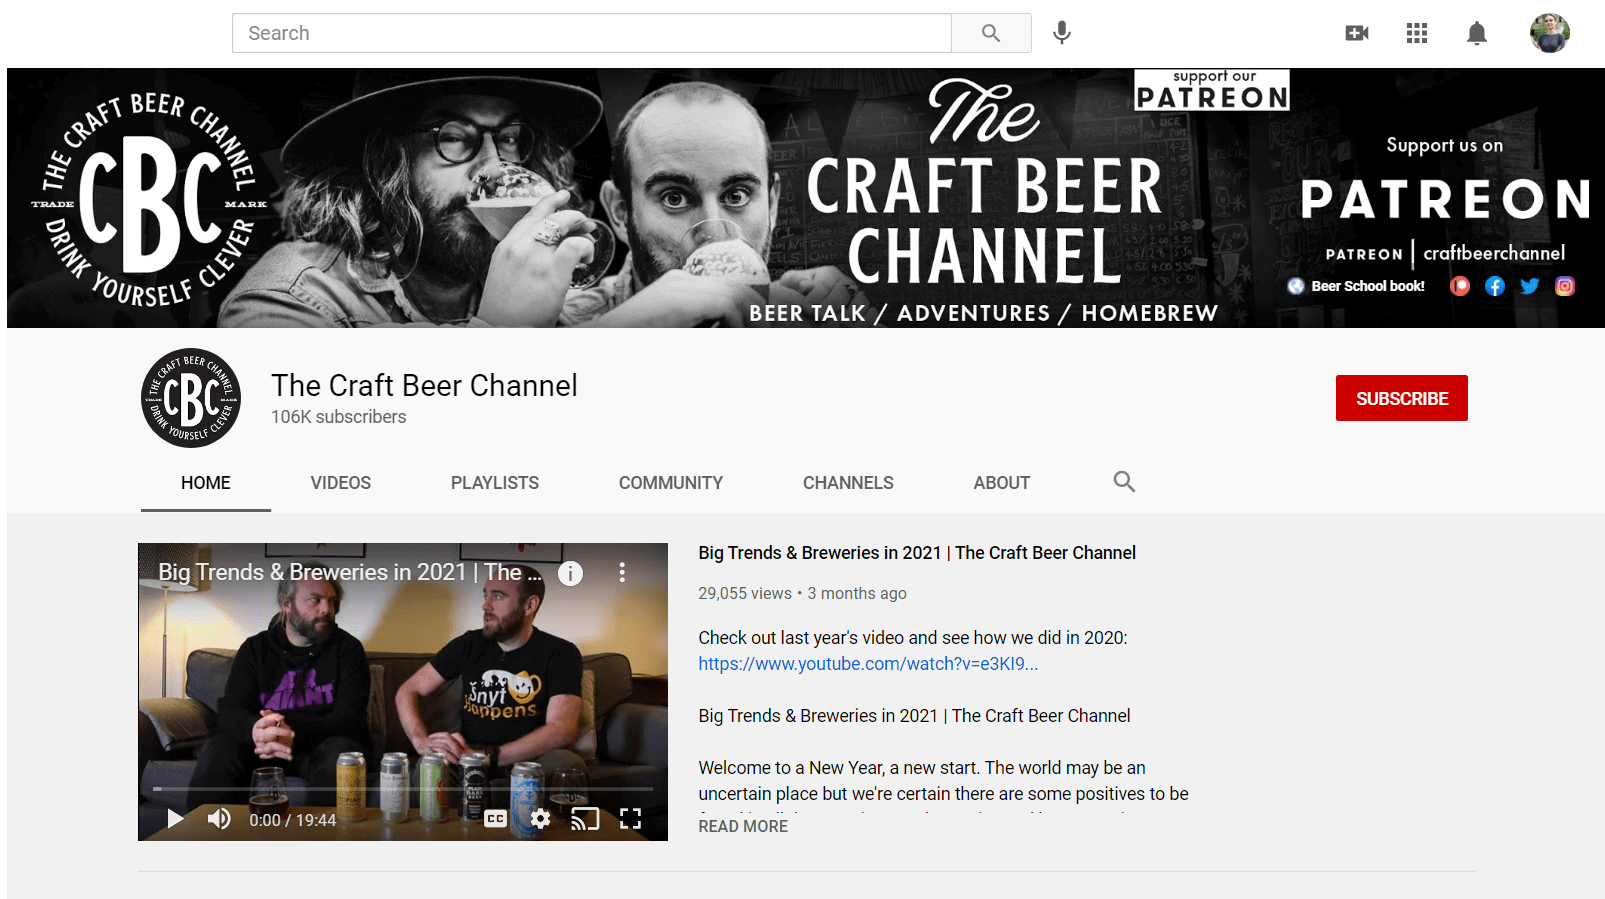  The Craft Beer Channel